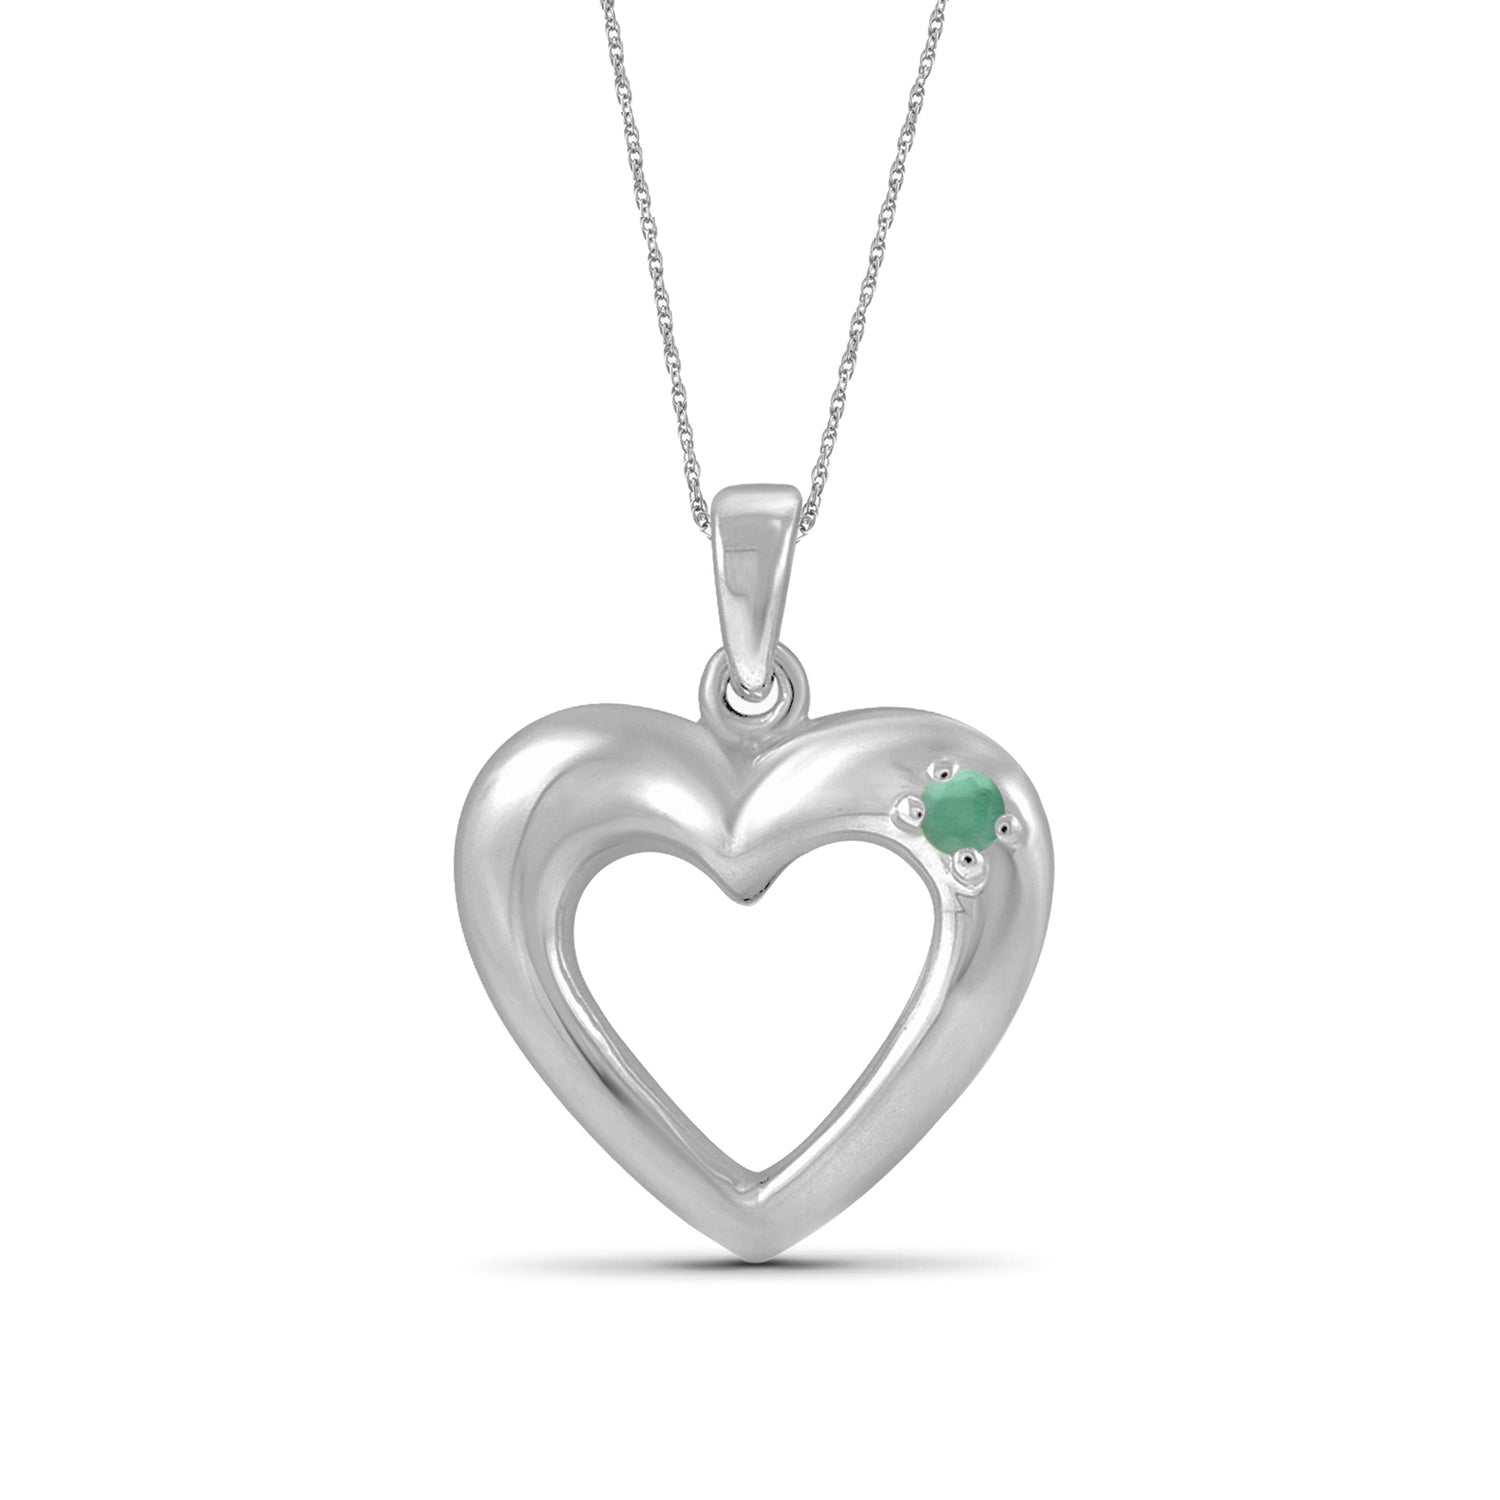 Emerald Accent Sterling Silver Heart Pendant, 18"